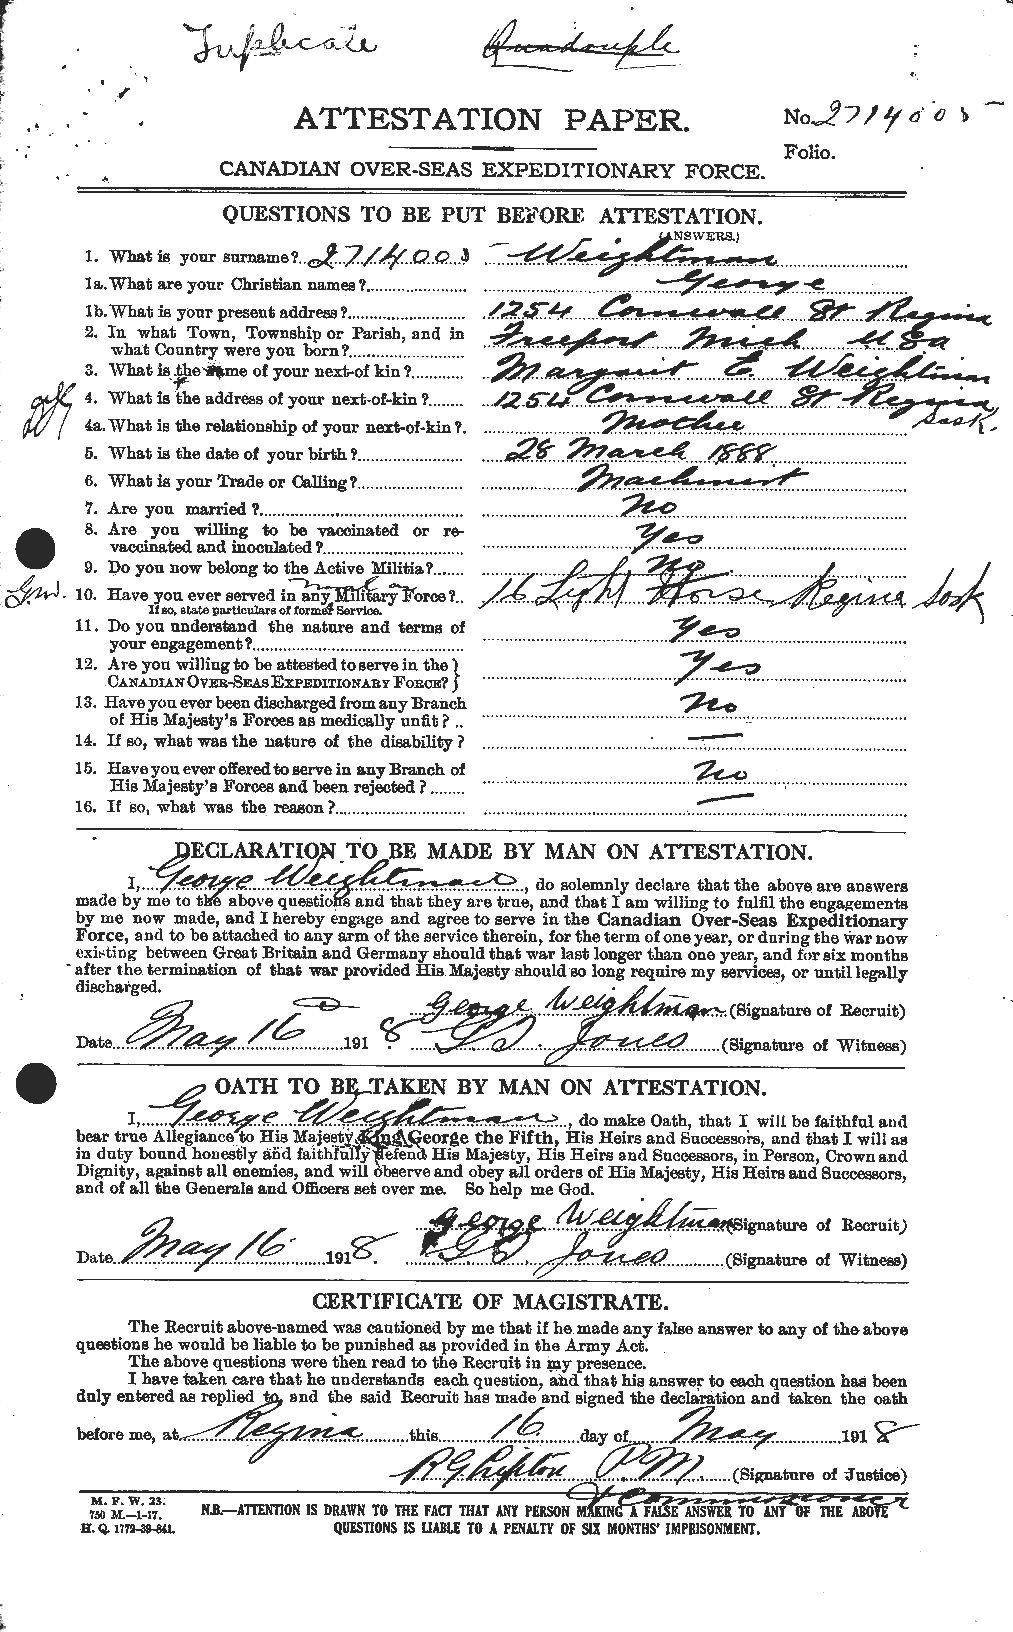 Personnel Records of the First World War - CEF 663638a